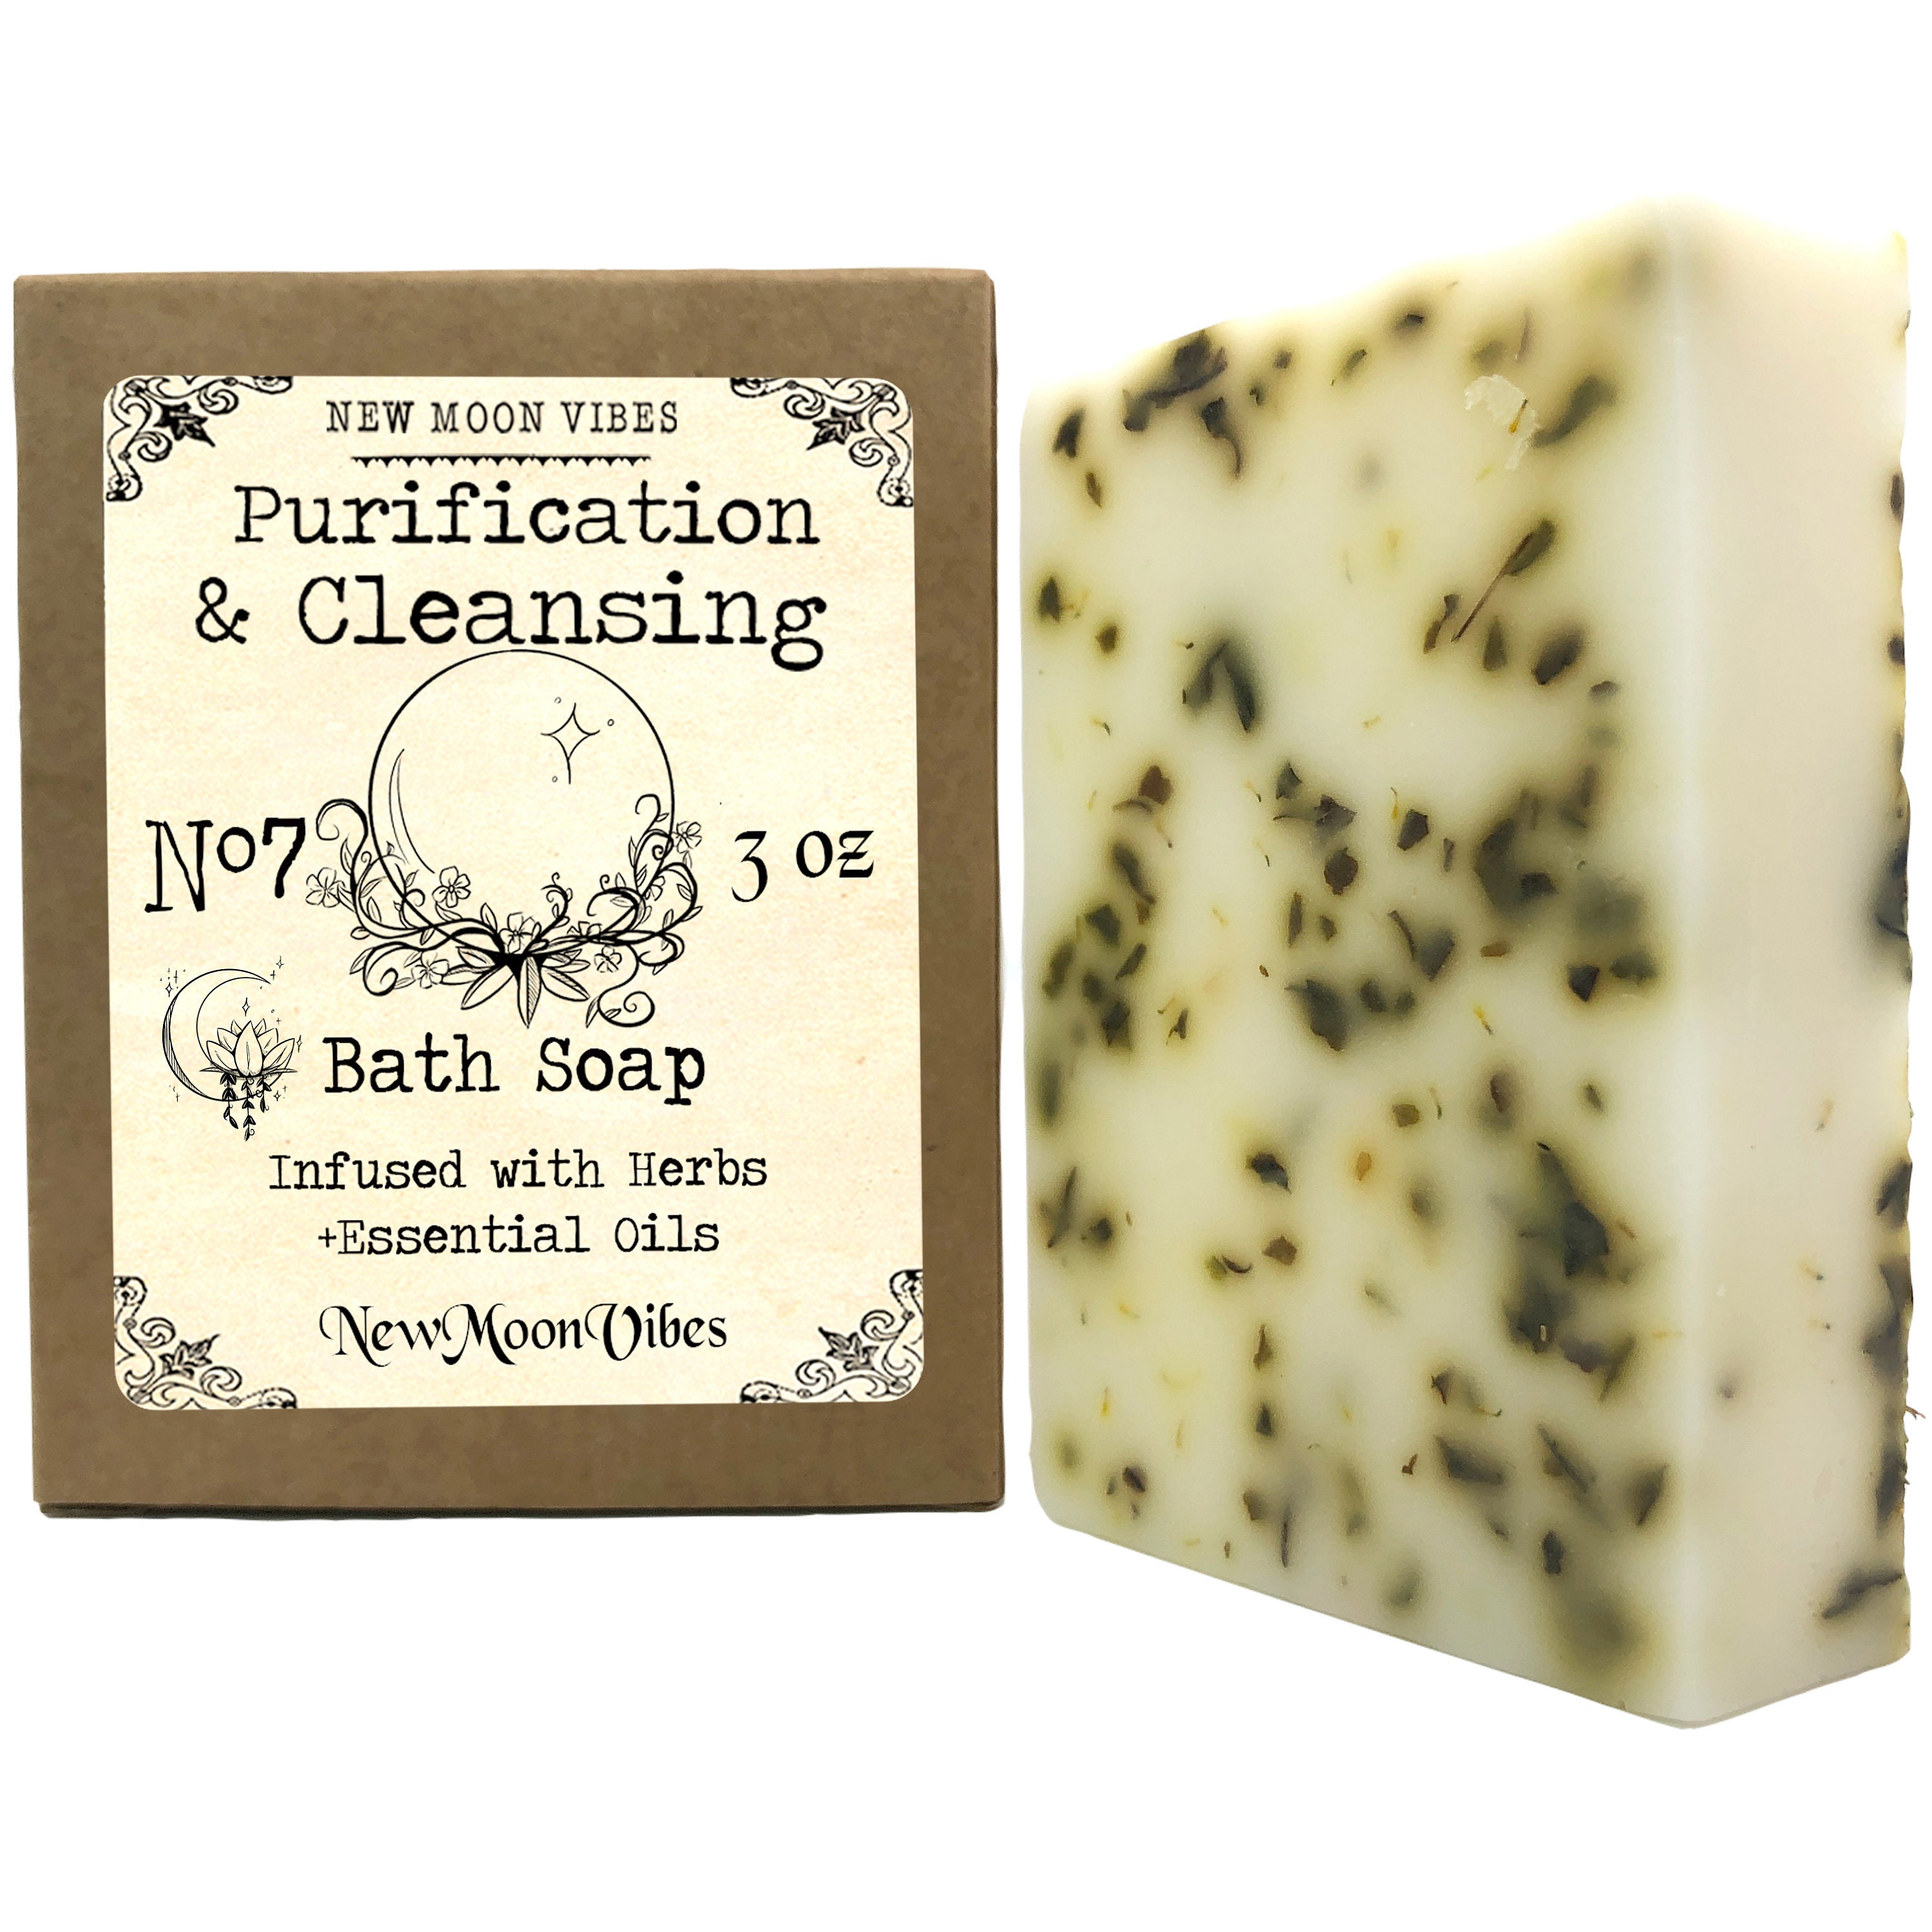  Money Drawing Attraction Spiritual Soap to Cleanse Your Aura  Balance Chakras Fast Luck Highly Scented Herbal Soap Cleansing of the Body  in Spiritual Baths, Remove Negative Energy Spirits & Uncrossing 